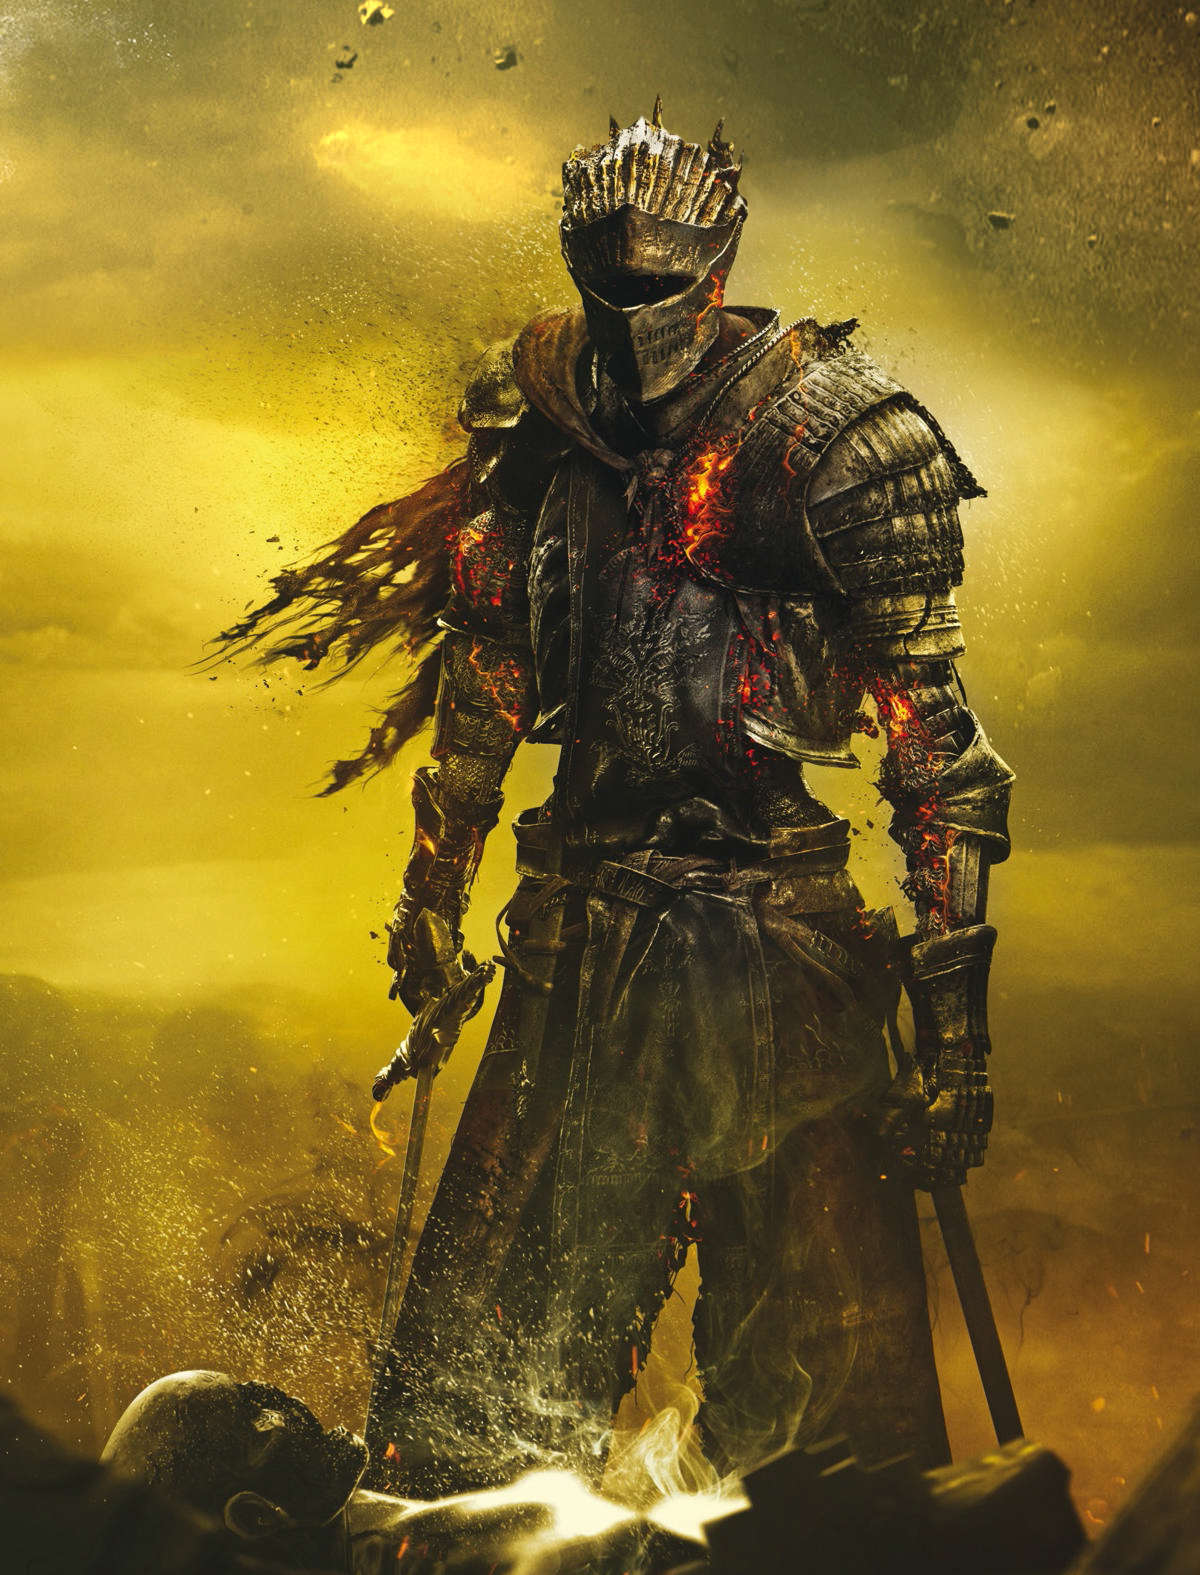 IGN - It is a running tradition of Soulsborne games that the